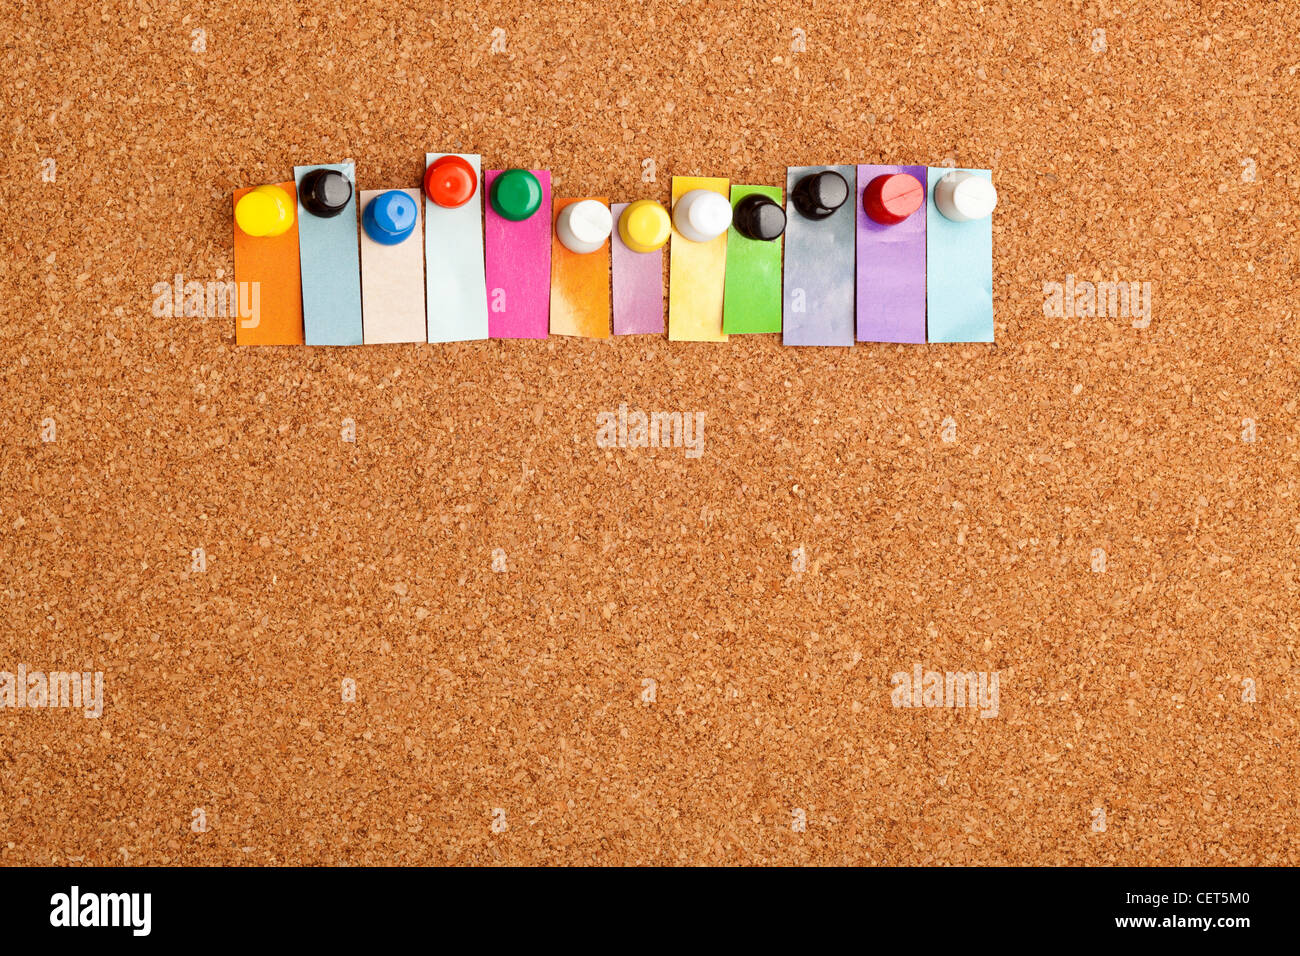 Cork board and colorful heading with copyspace for a twelve letter word Stock Photo